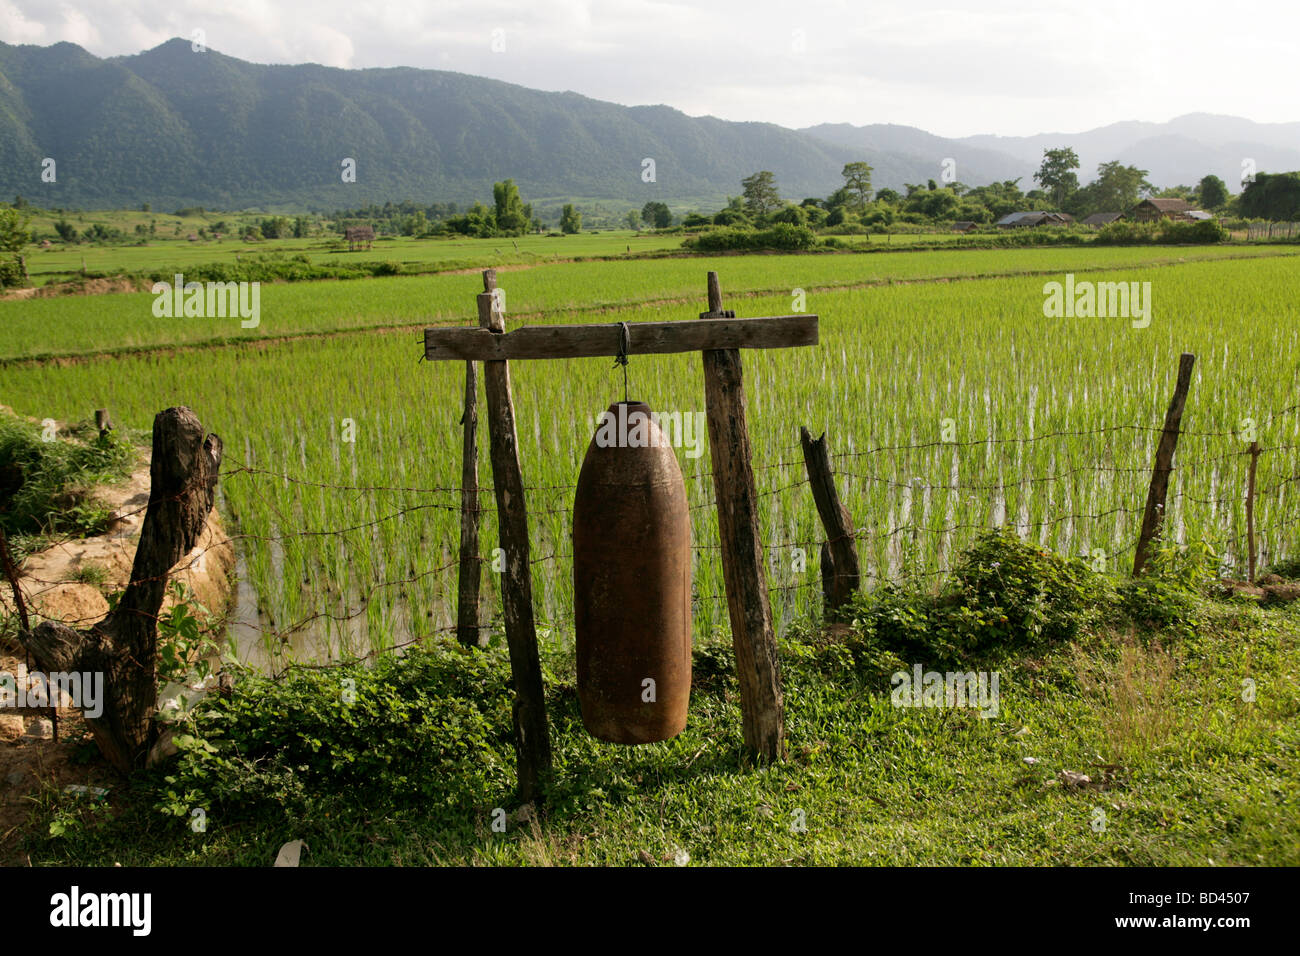 Xieng Khouang, Laos, 2006 : A  500 pound bomb casing dropped by the US in the Vietnam War is used as a gong beside rice paddies Stock Photo